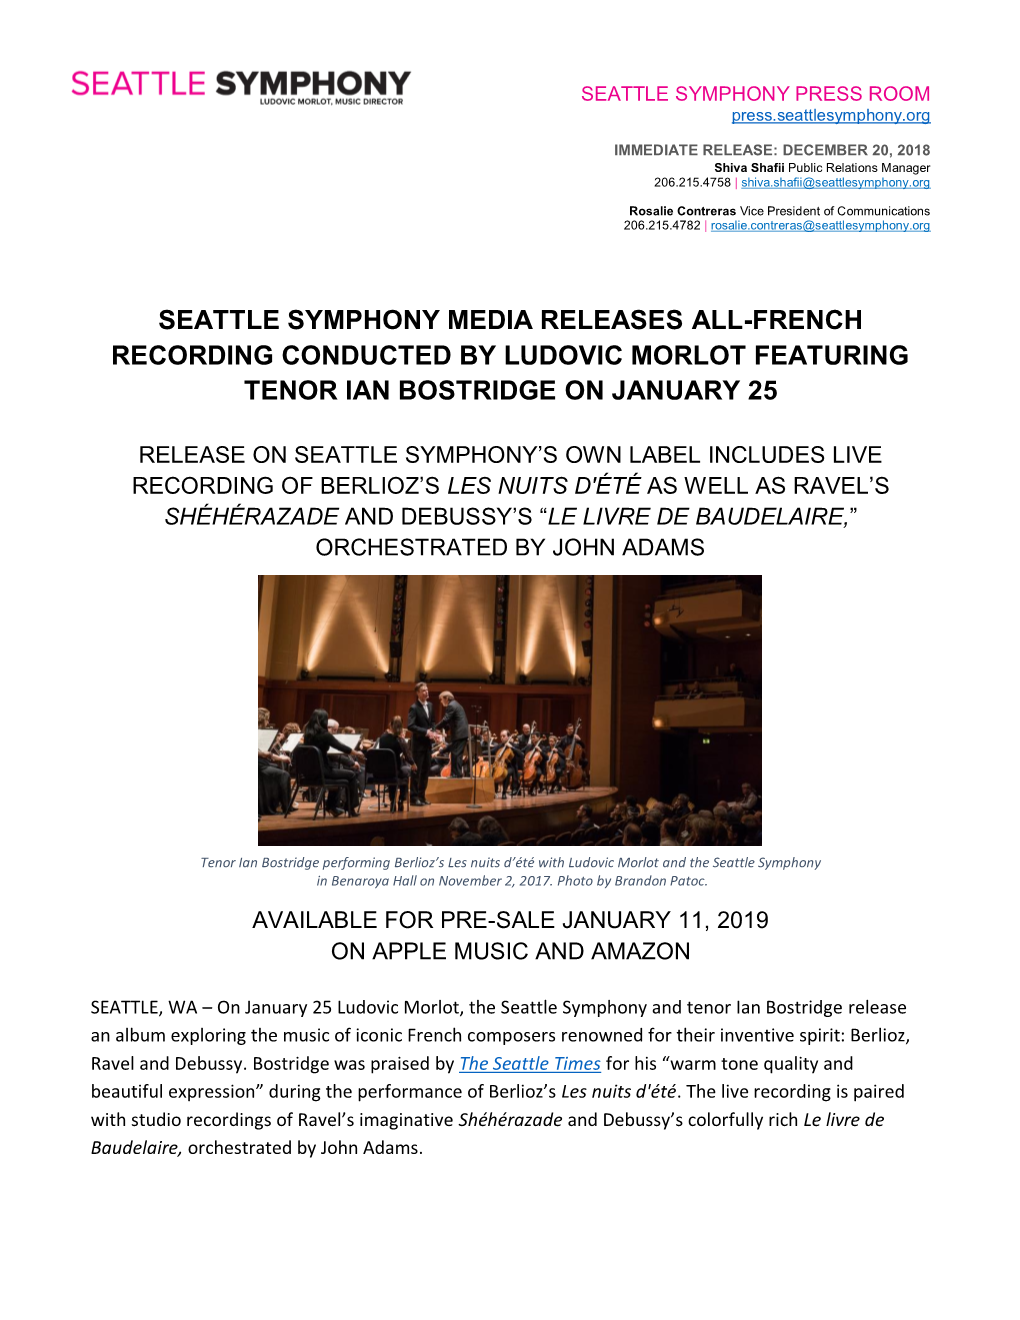 Seattle Symphony Media Releases All-French Recording Conducted by Ludovic Morlot Featuring Tenor Ian Bostridge on January 25